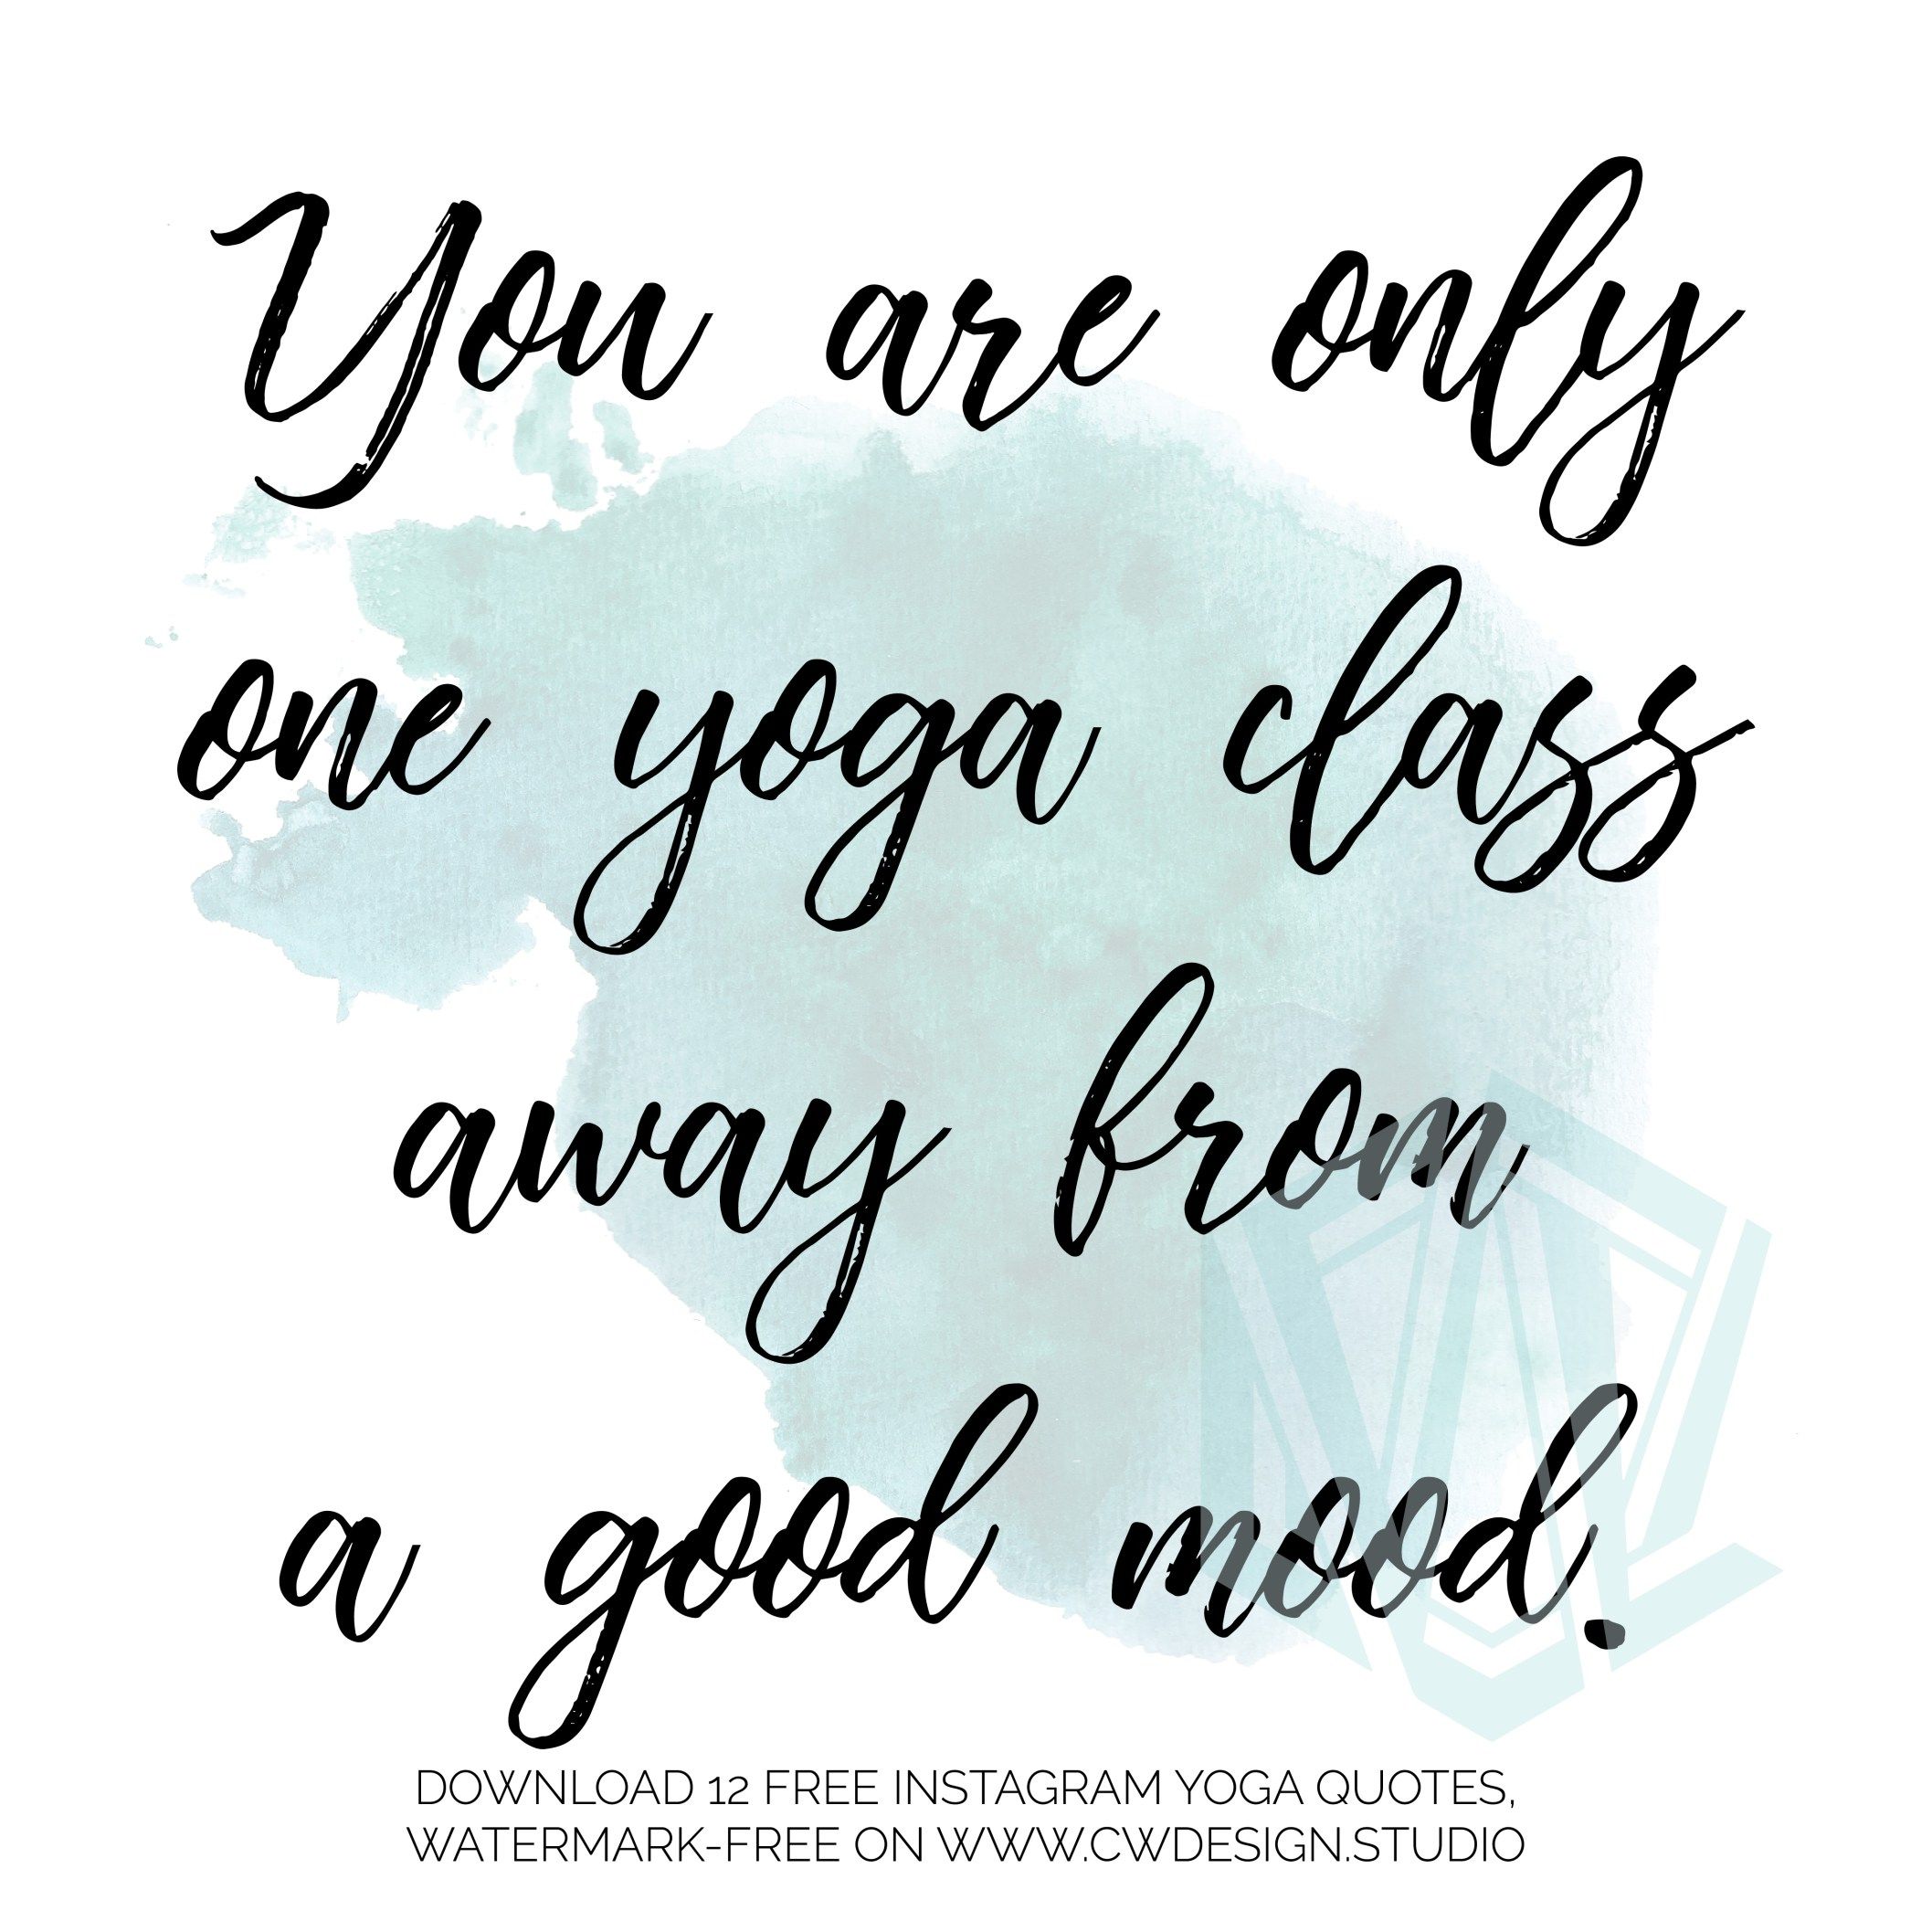 you are only one yoga class away from a good mood